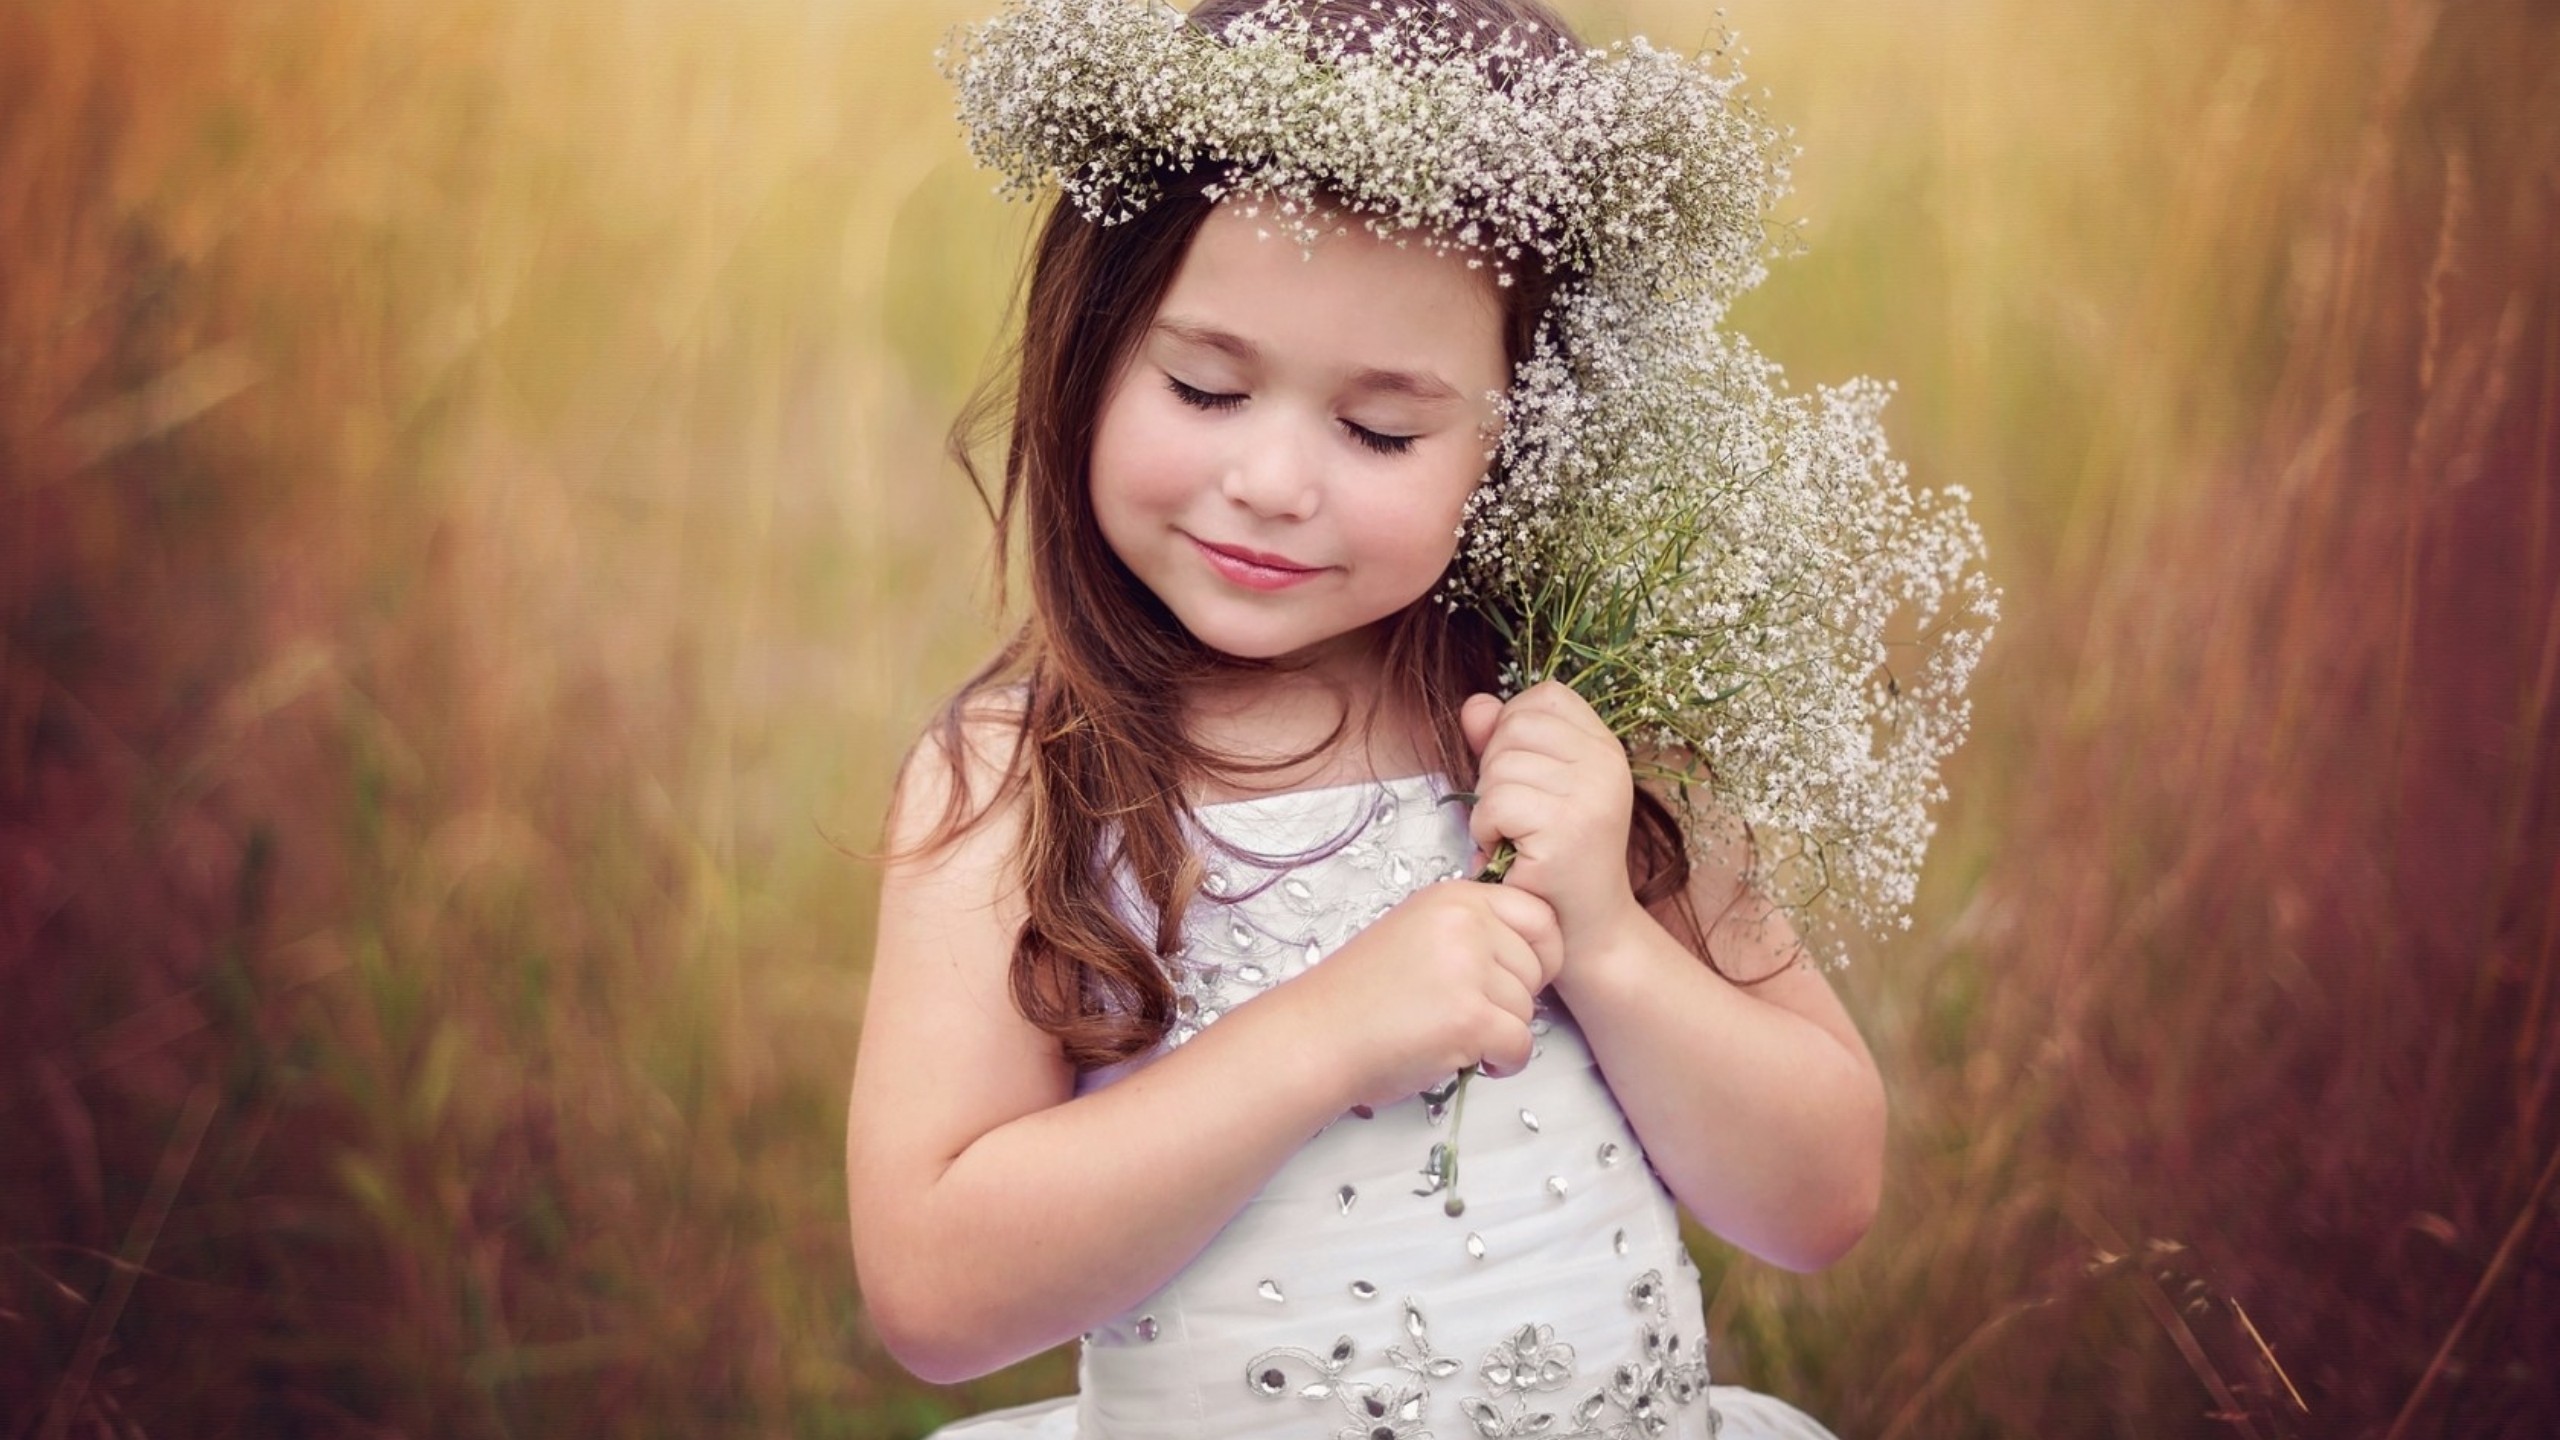 innocent girl wallpaper,people in nature,hair,photograph,facial expression,child